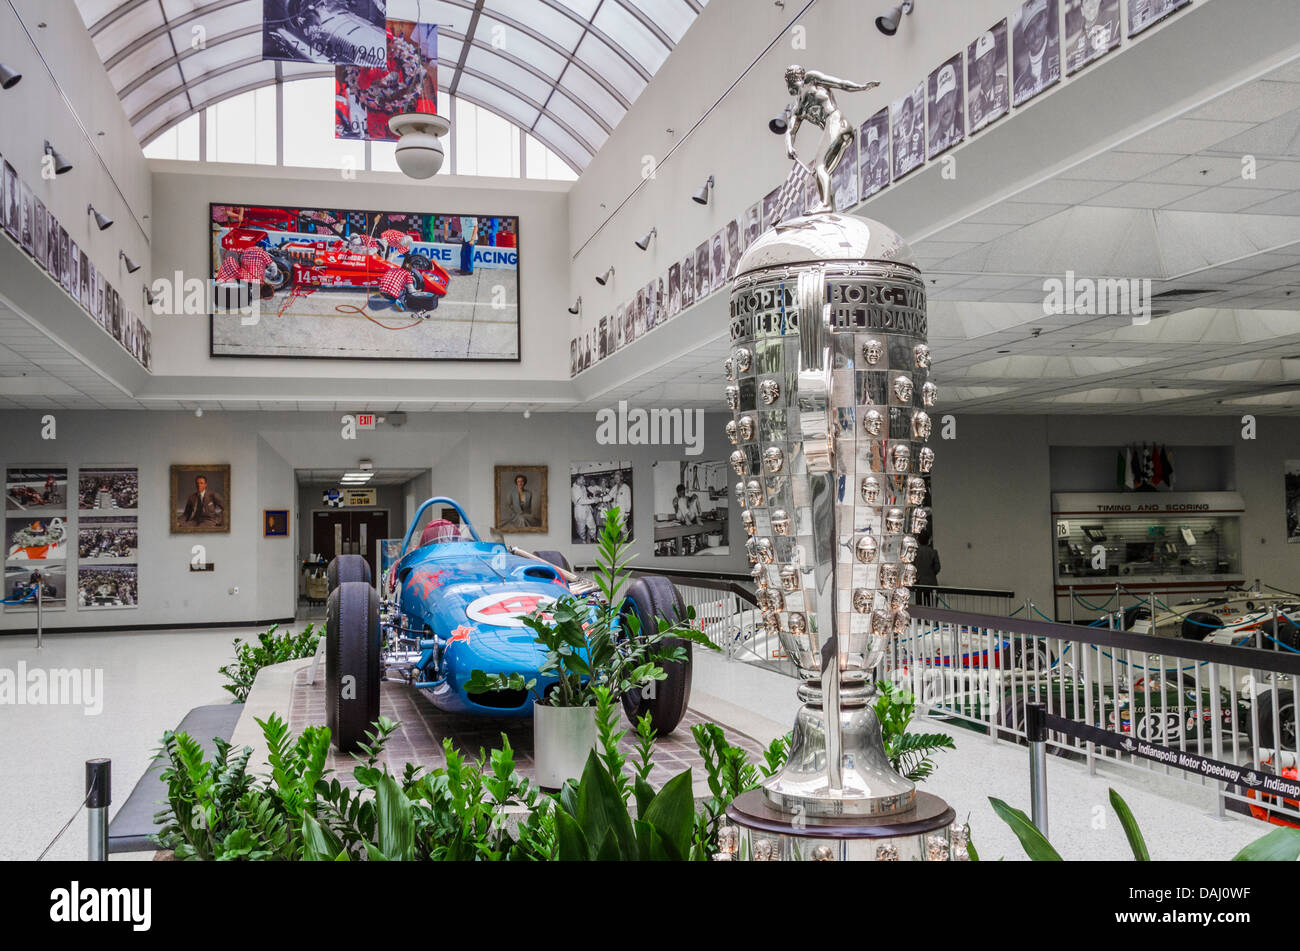 Indianapolis Motor Speedway Hall of Fame Museum, Indianapolis, Indiana, Stati Uniti d'America Foto Stock